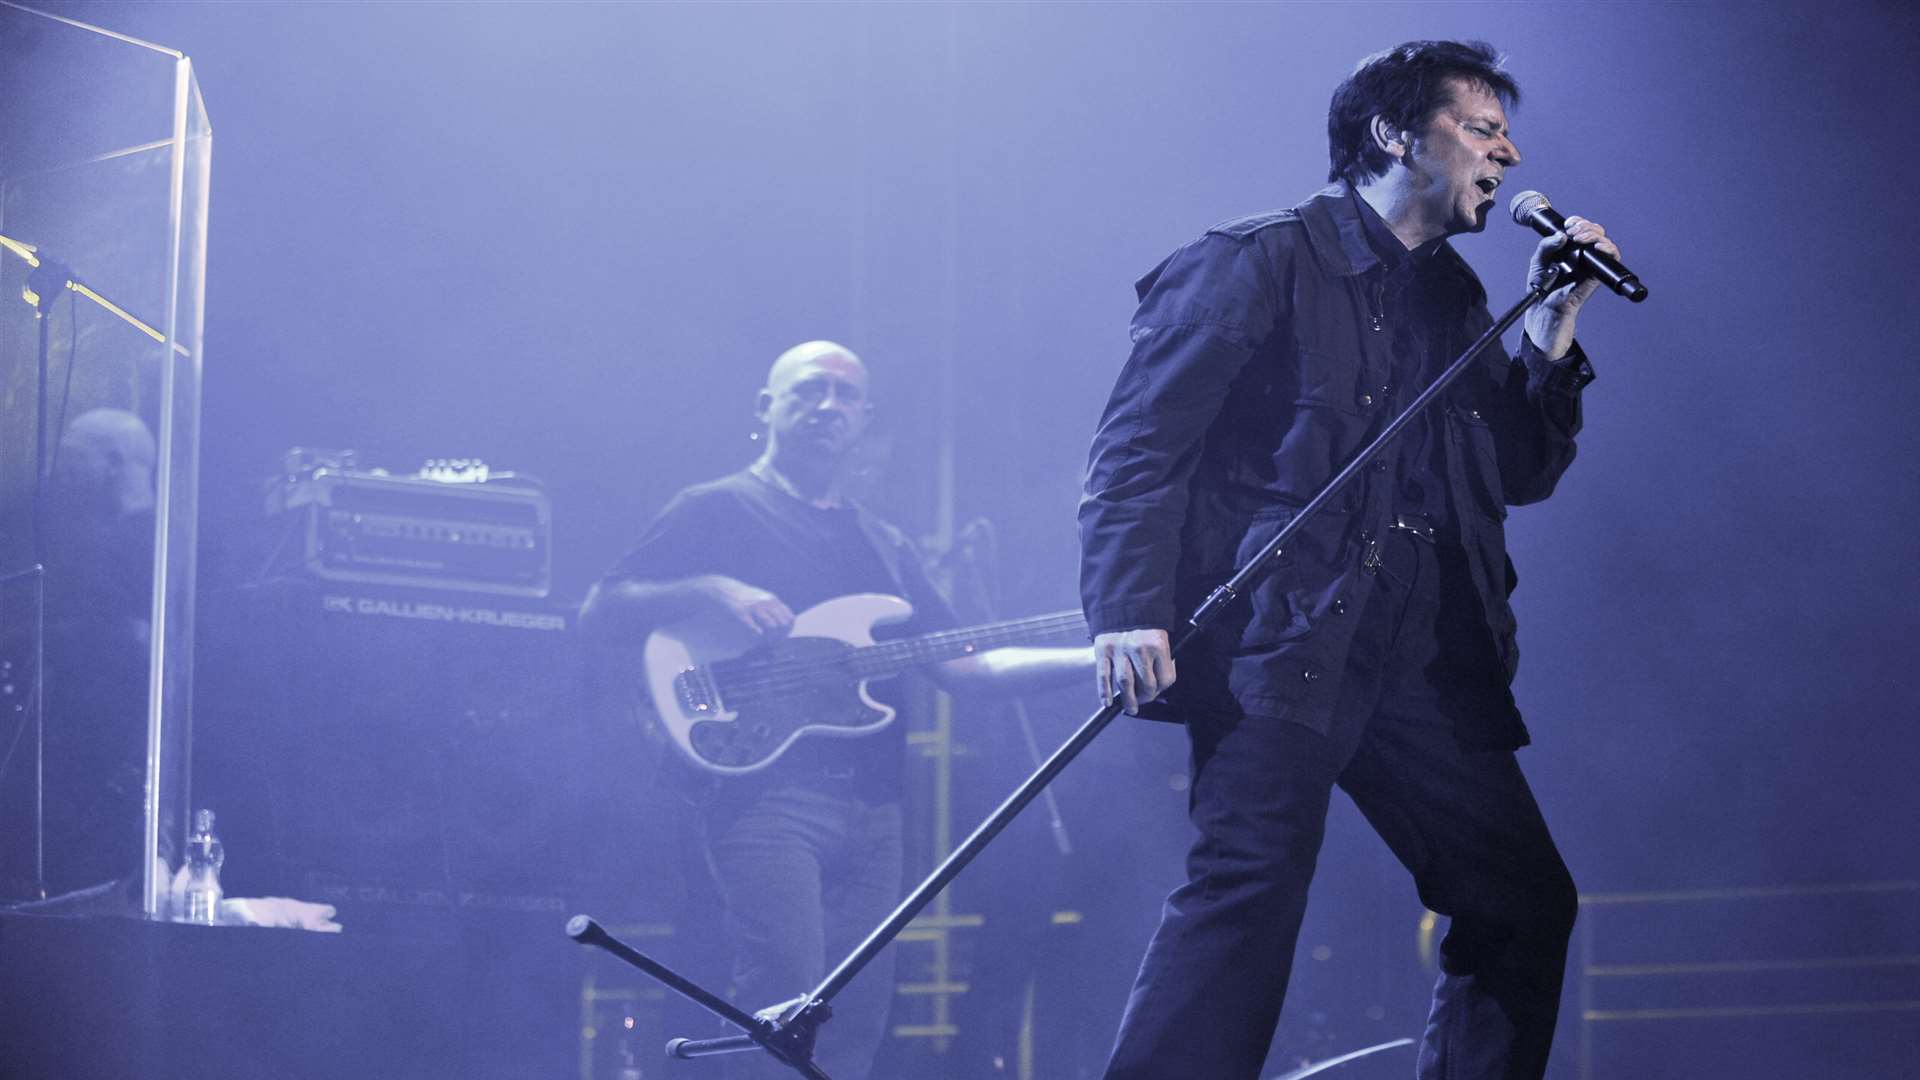 Shakin' Stevens rocked fans at The Orchard Theatre.